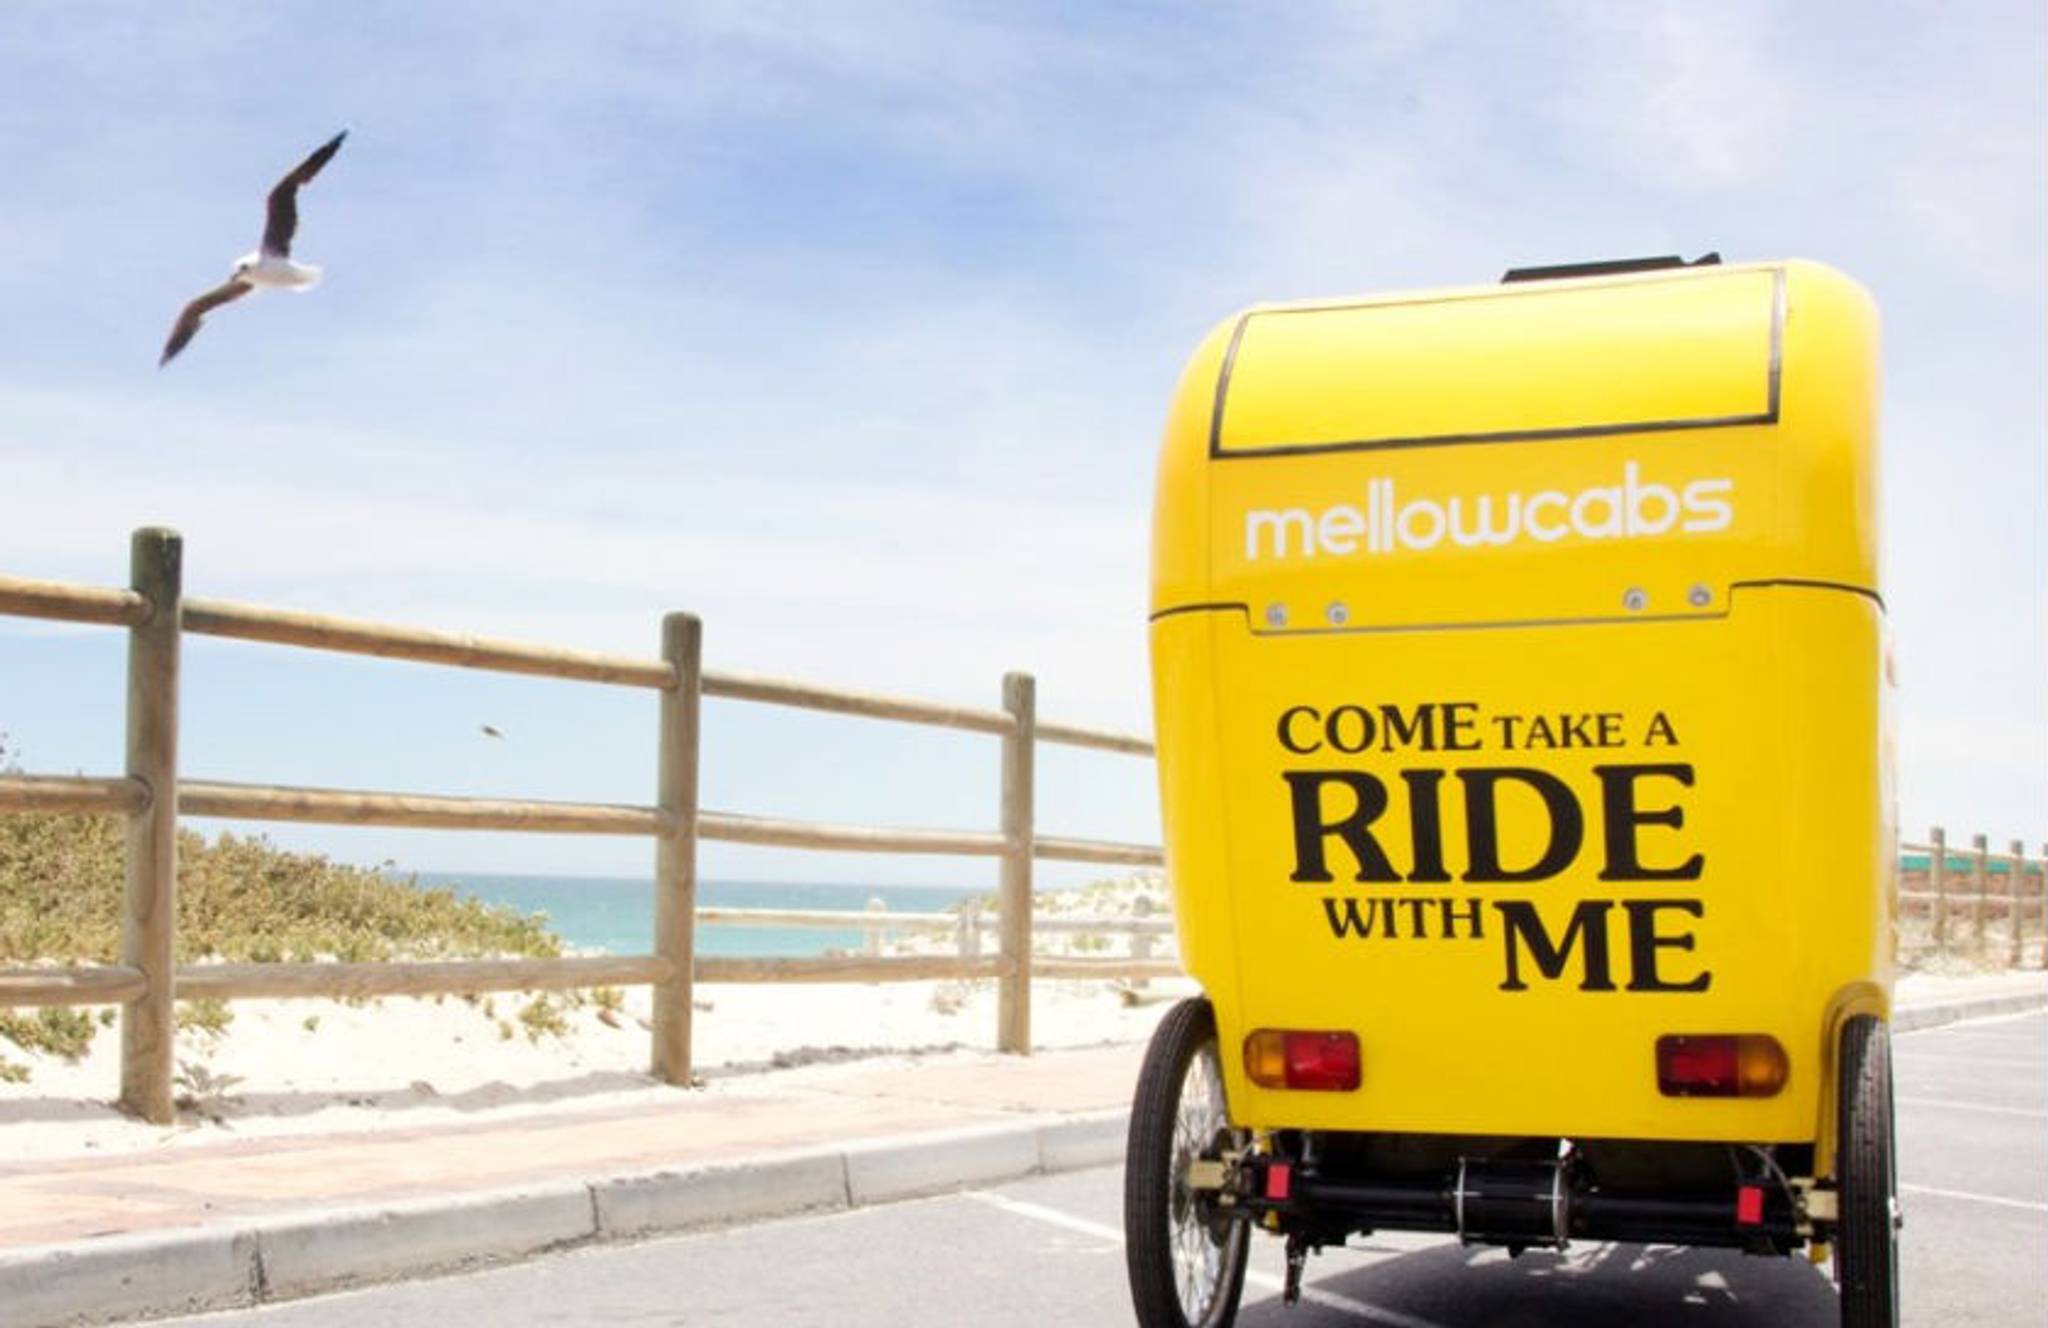 Grab a free ride in a branded taxi